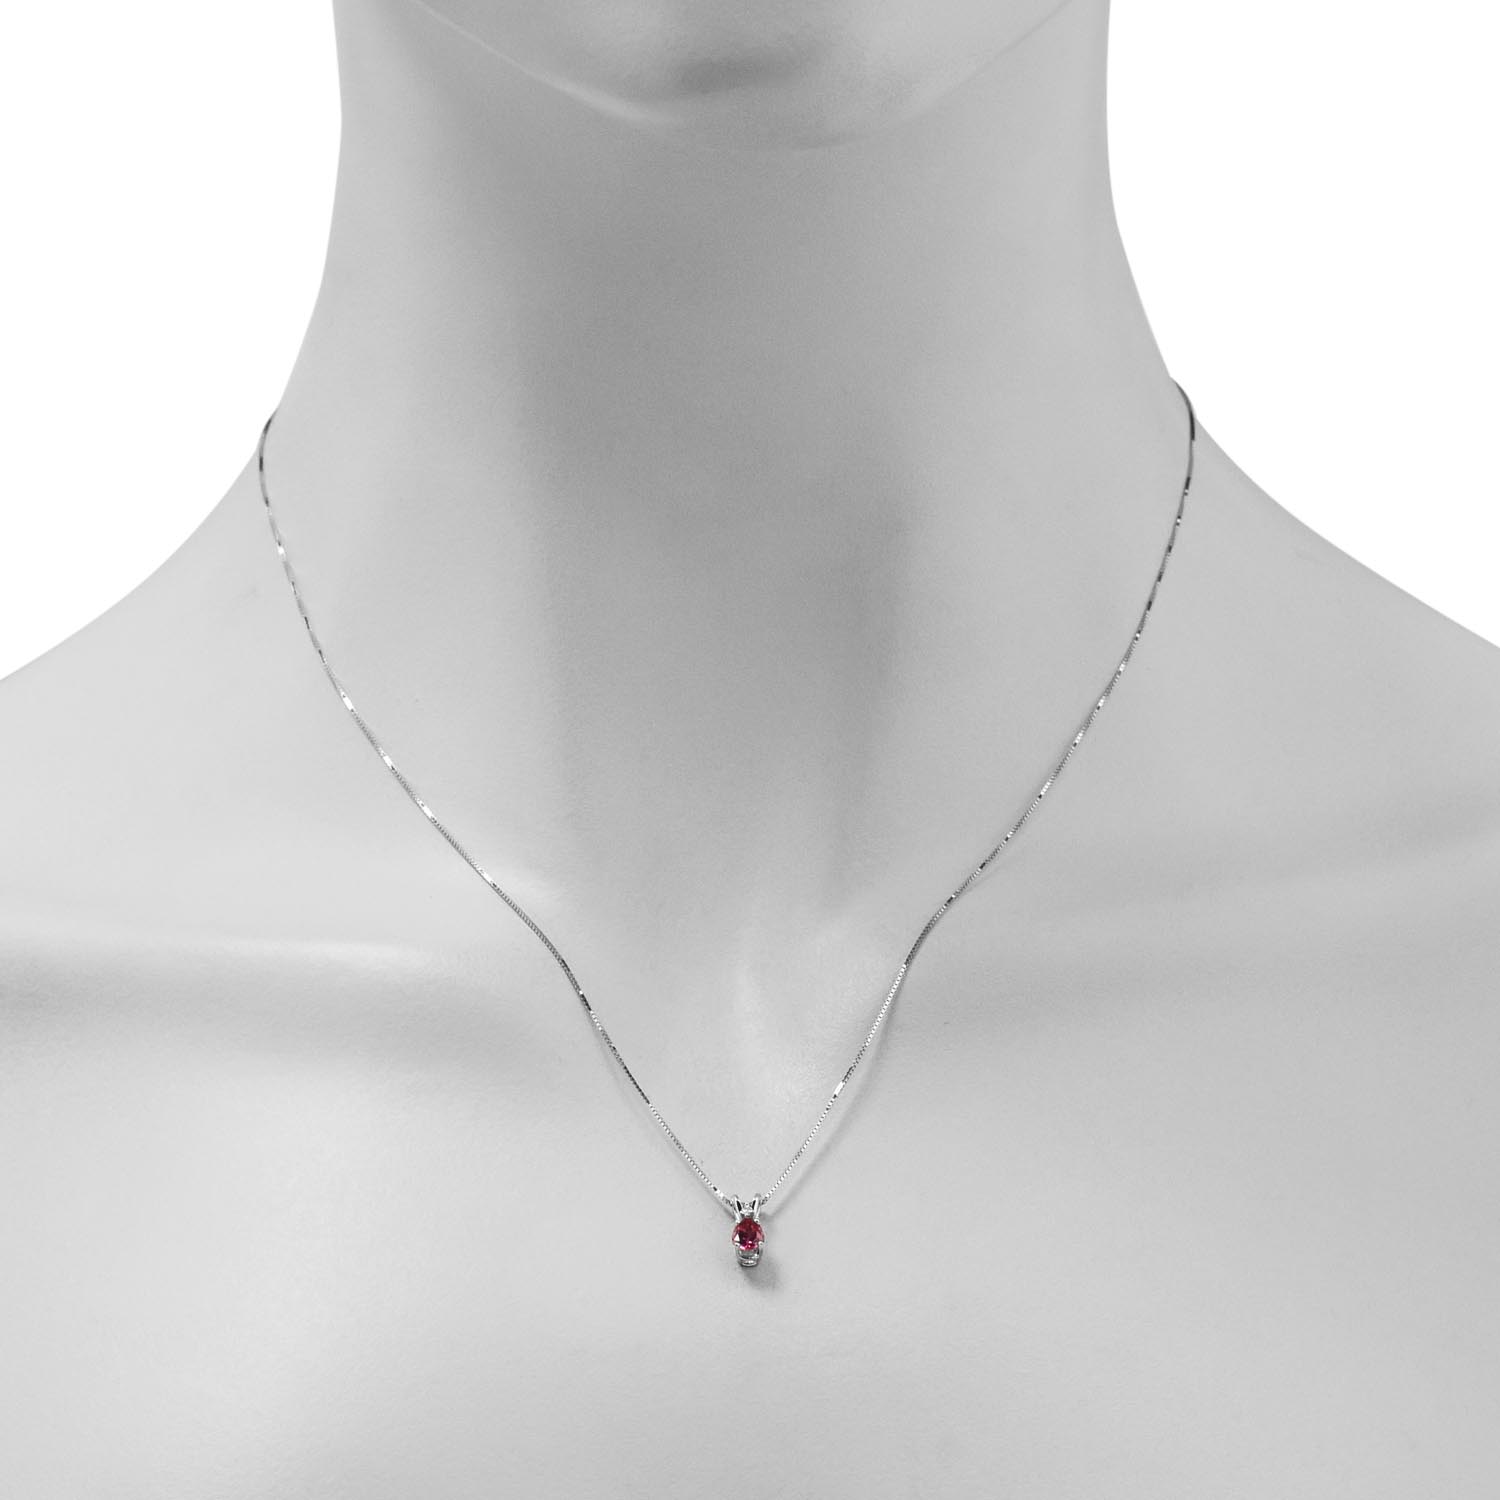 Maine Pink Tourmaline Necklace in 14kt White Gold with Diamond (.01ct)